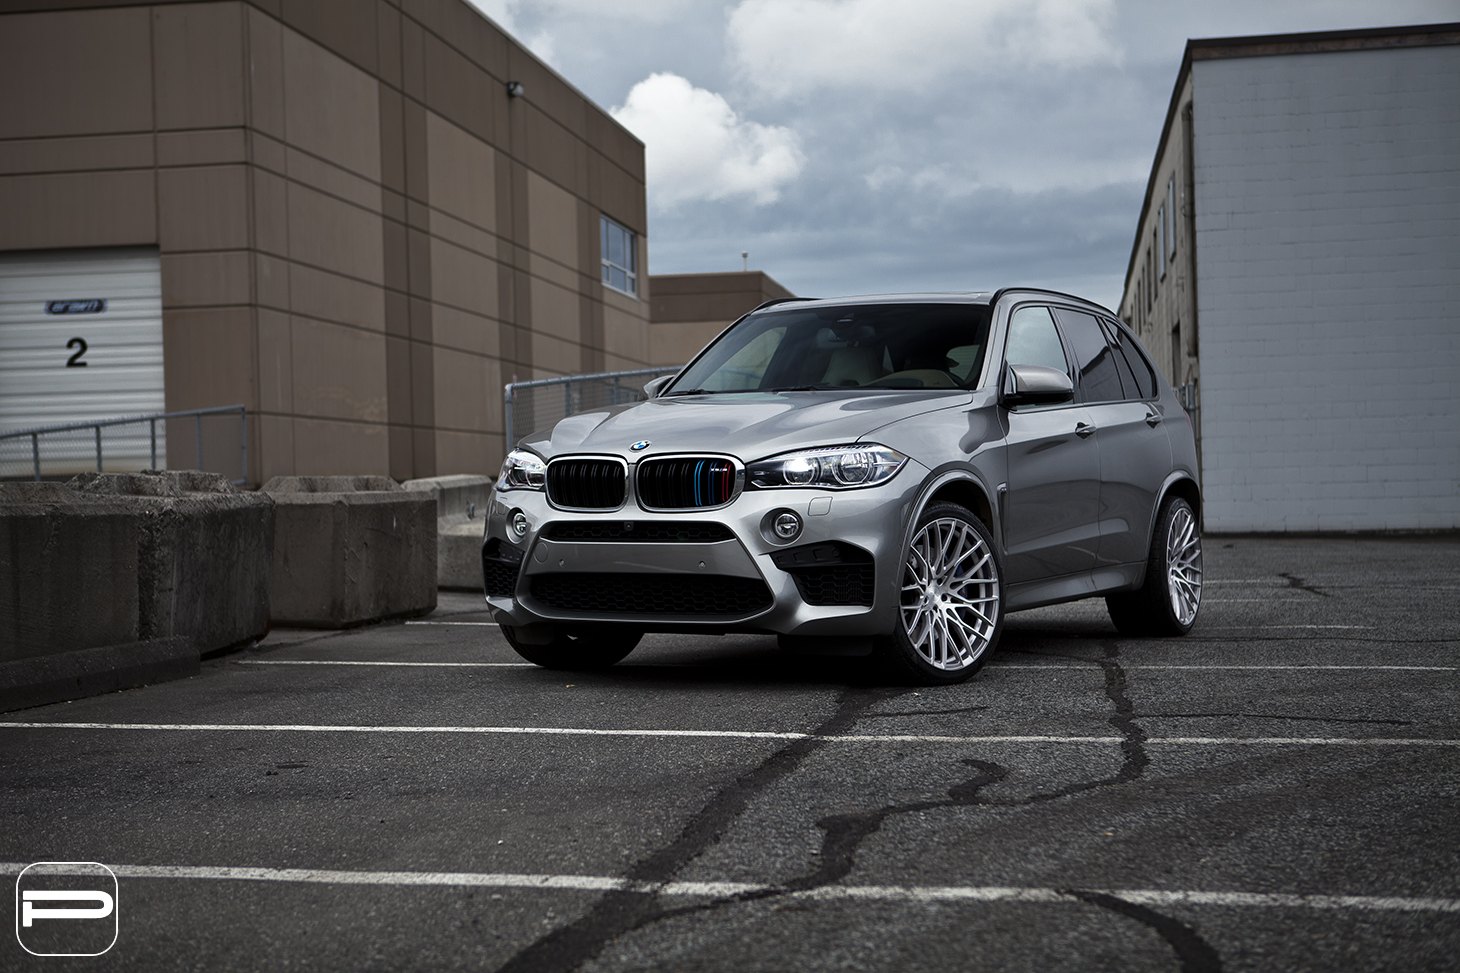 Aftermarket Projector Headlights on Gray BMW X5 - Photo by PUR Wheels